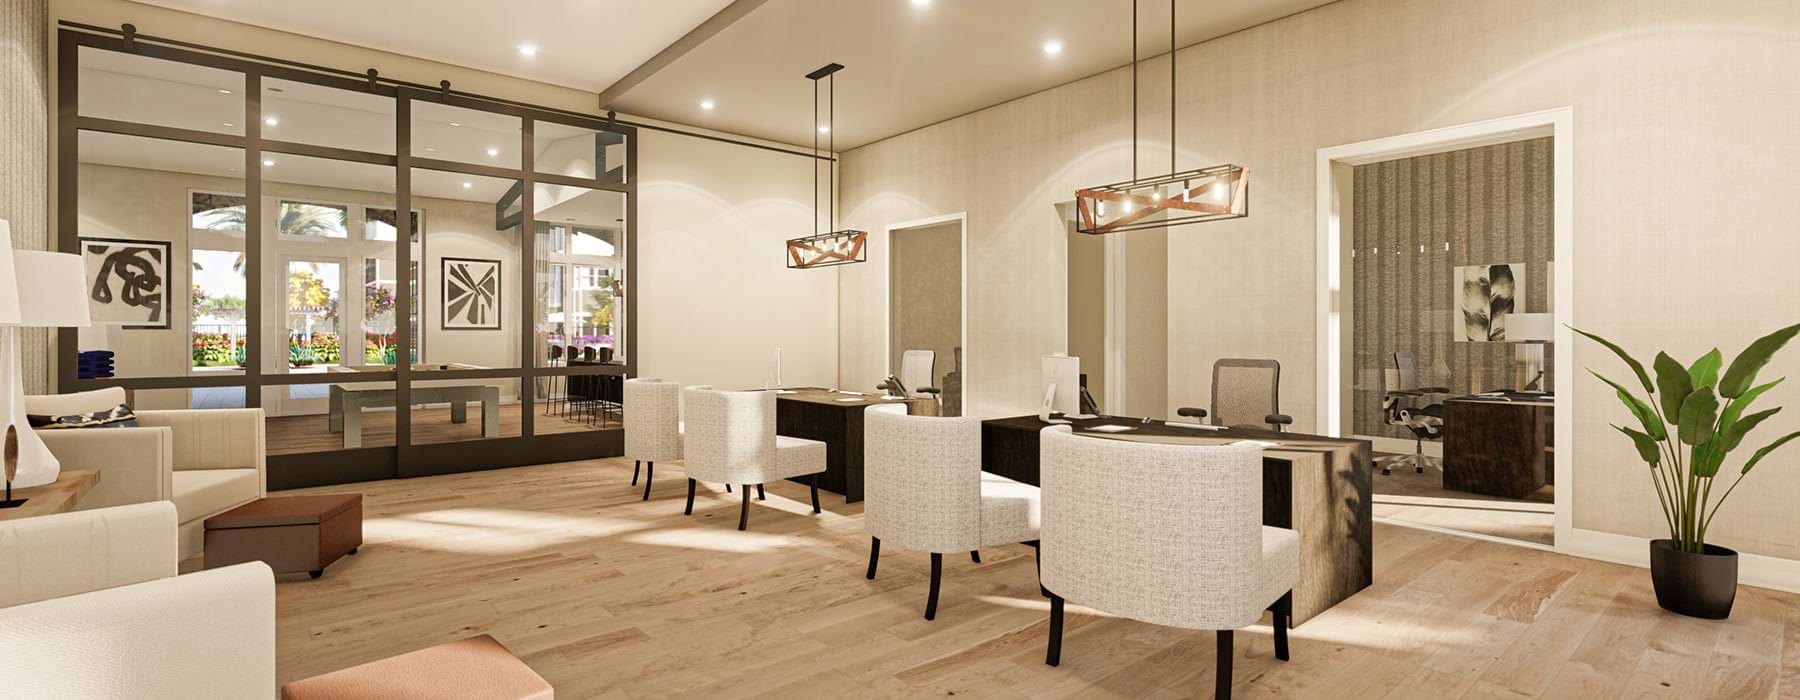 rendering of leasing office showing ample seating and modern decor